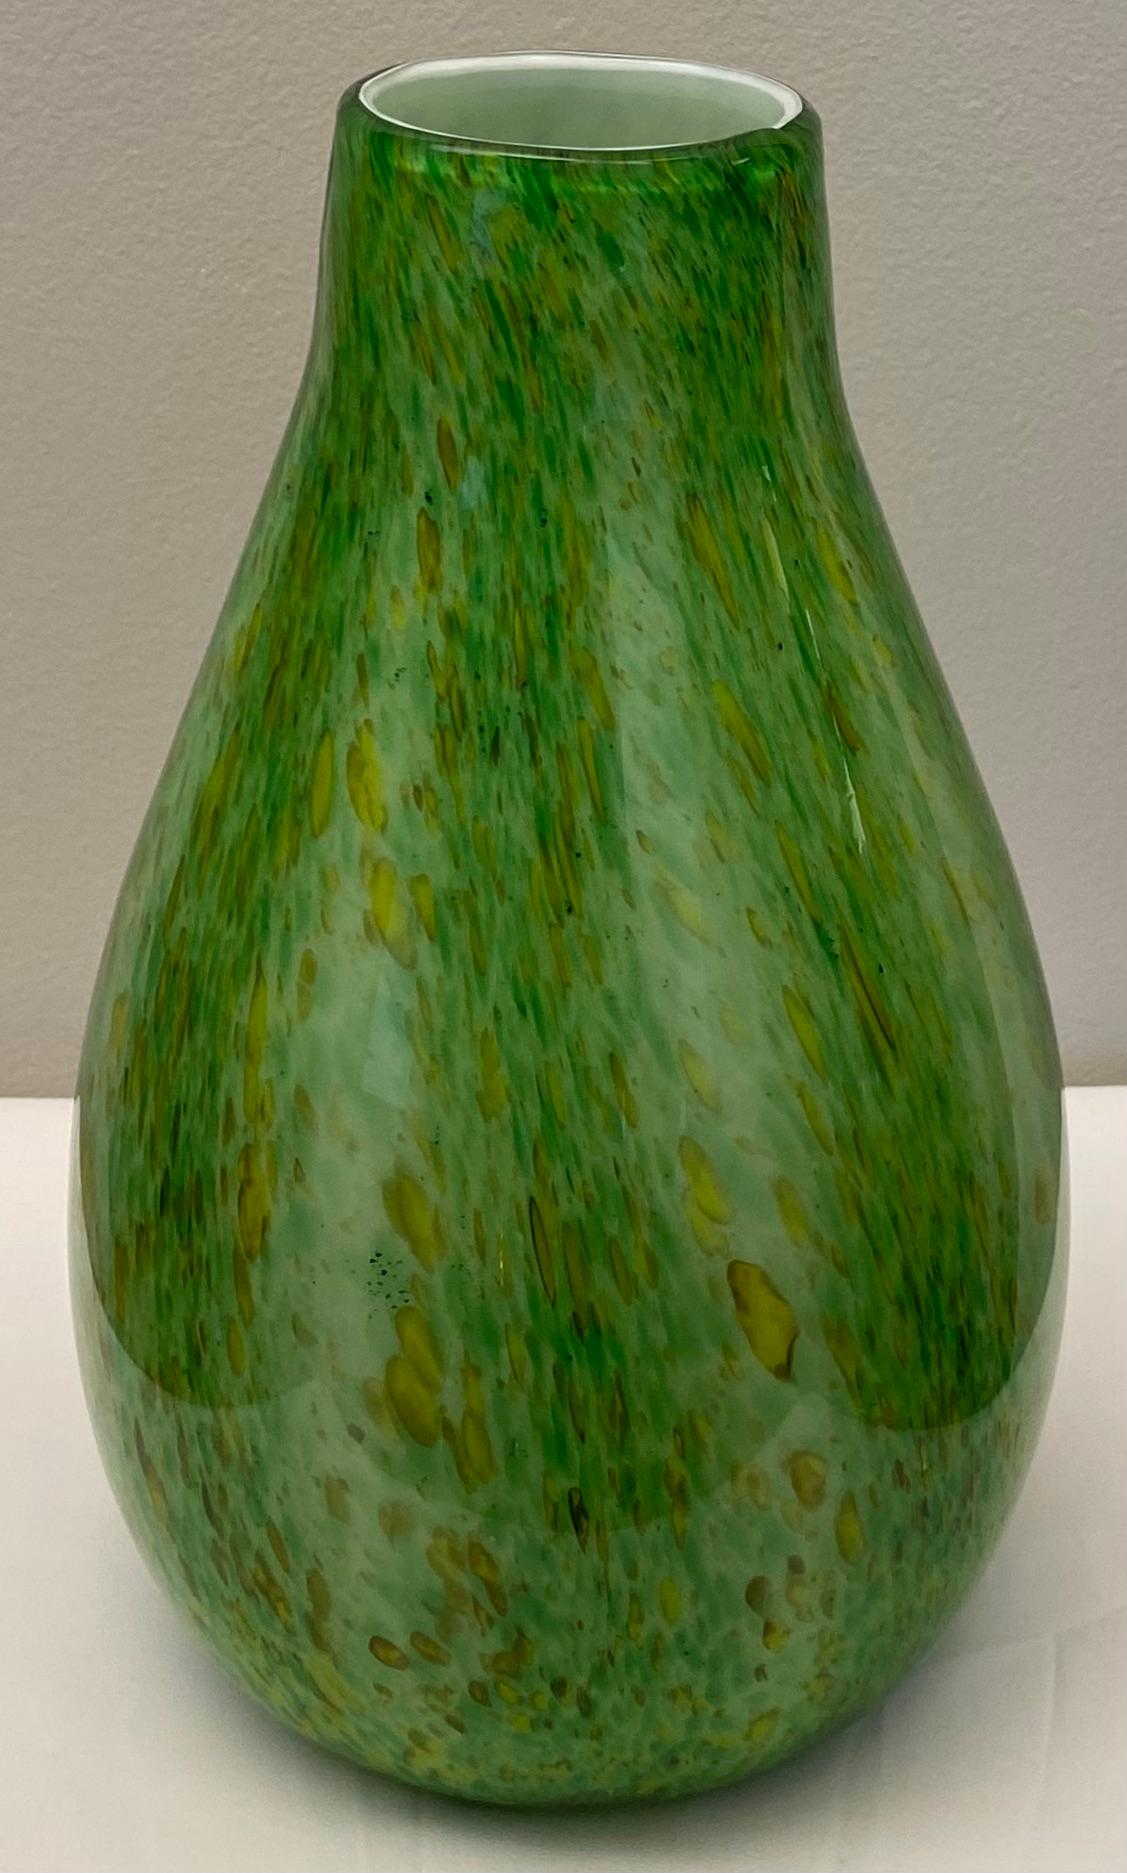 Formia Green Murano Art Glass Vase in the manner of Hilton McConnico In Good Condition For Sale In Miami, FL